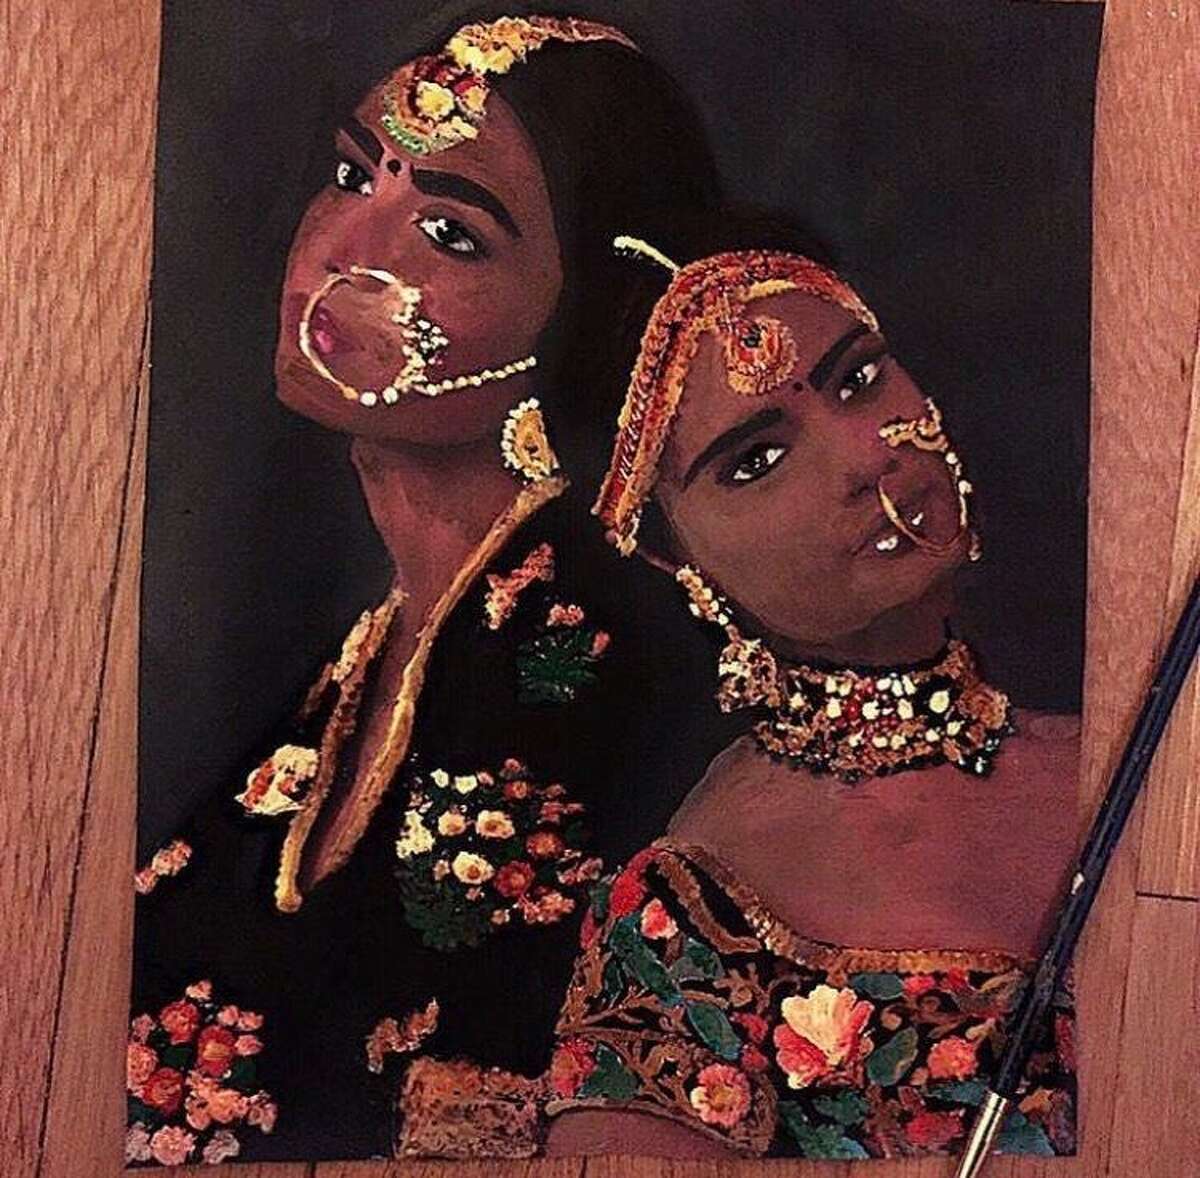 Bhadrangi Soni’s paintings feature South Asian survivors of sexual assault. Her work will be on display for “The Gallery” exhibit to raise awareness about sexual assault at Western Connecticut State University.